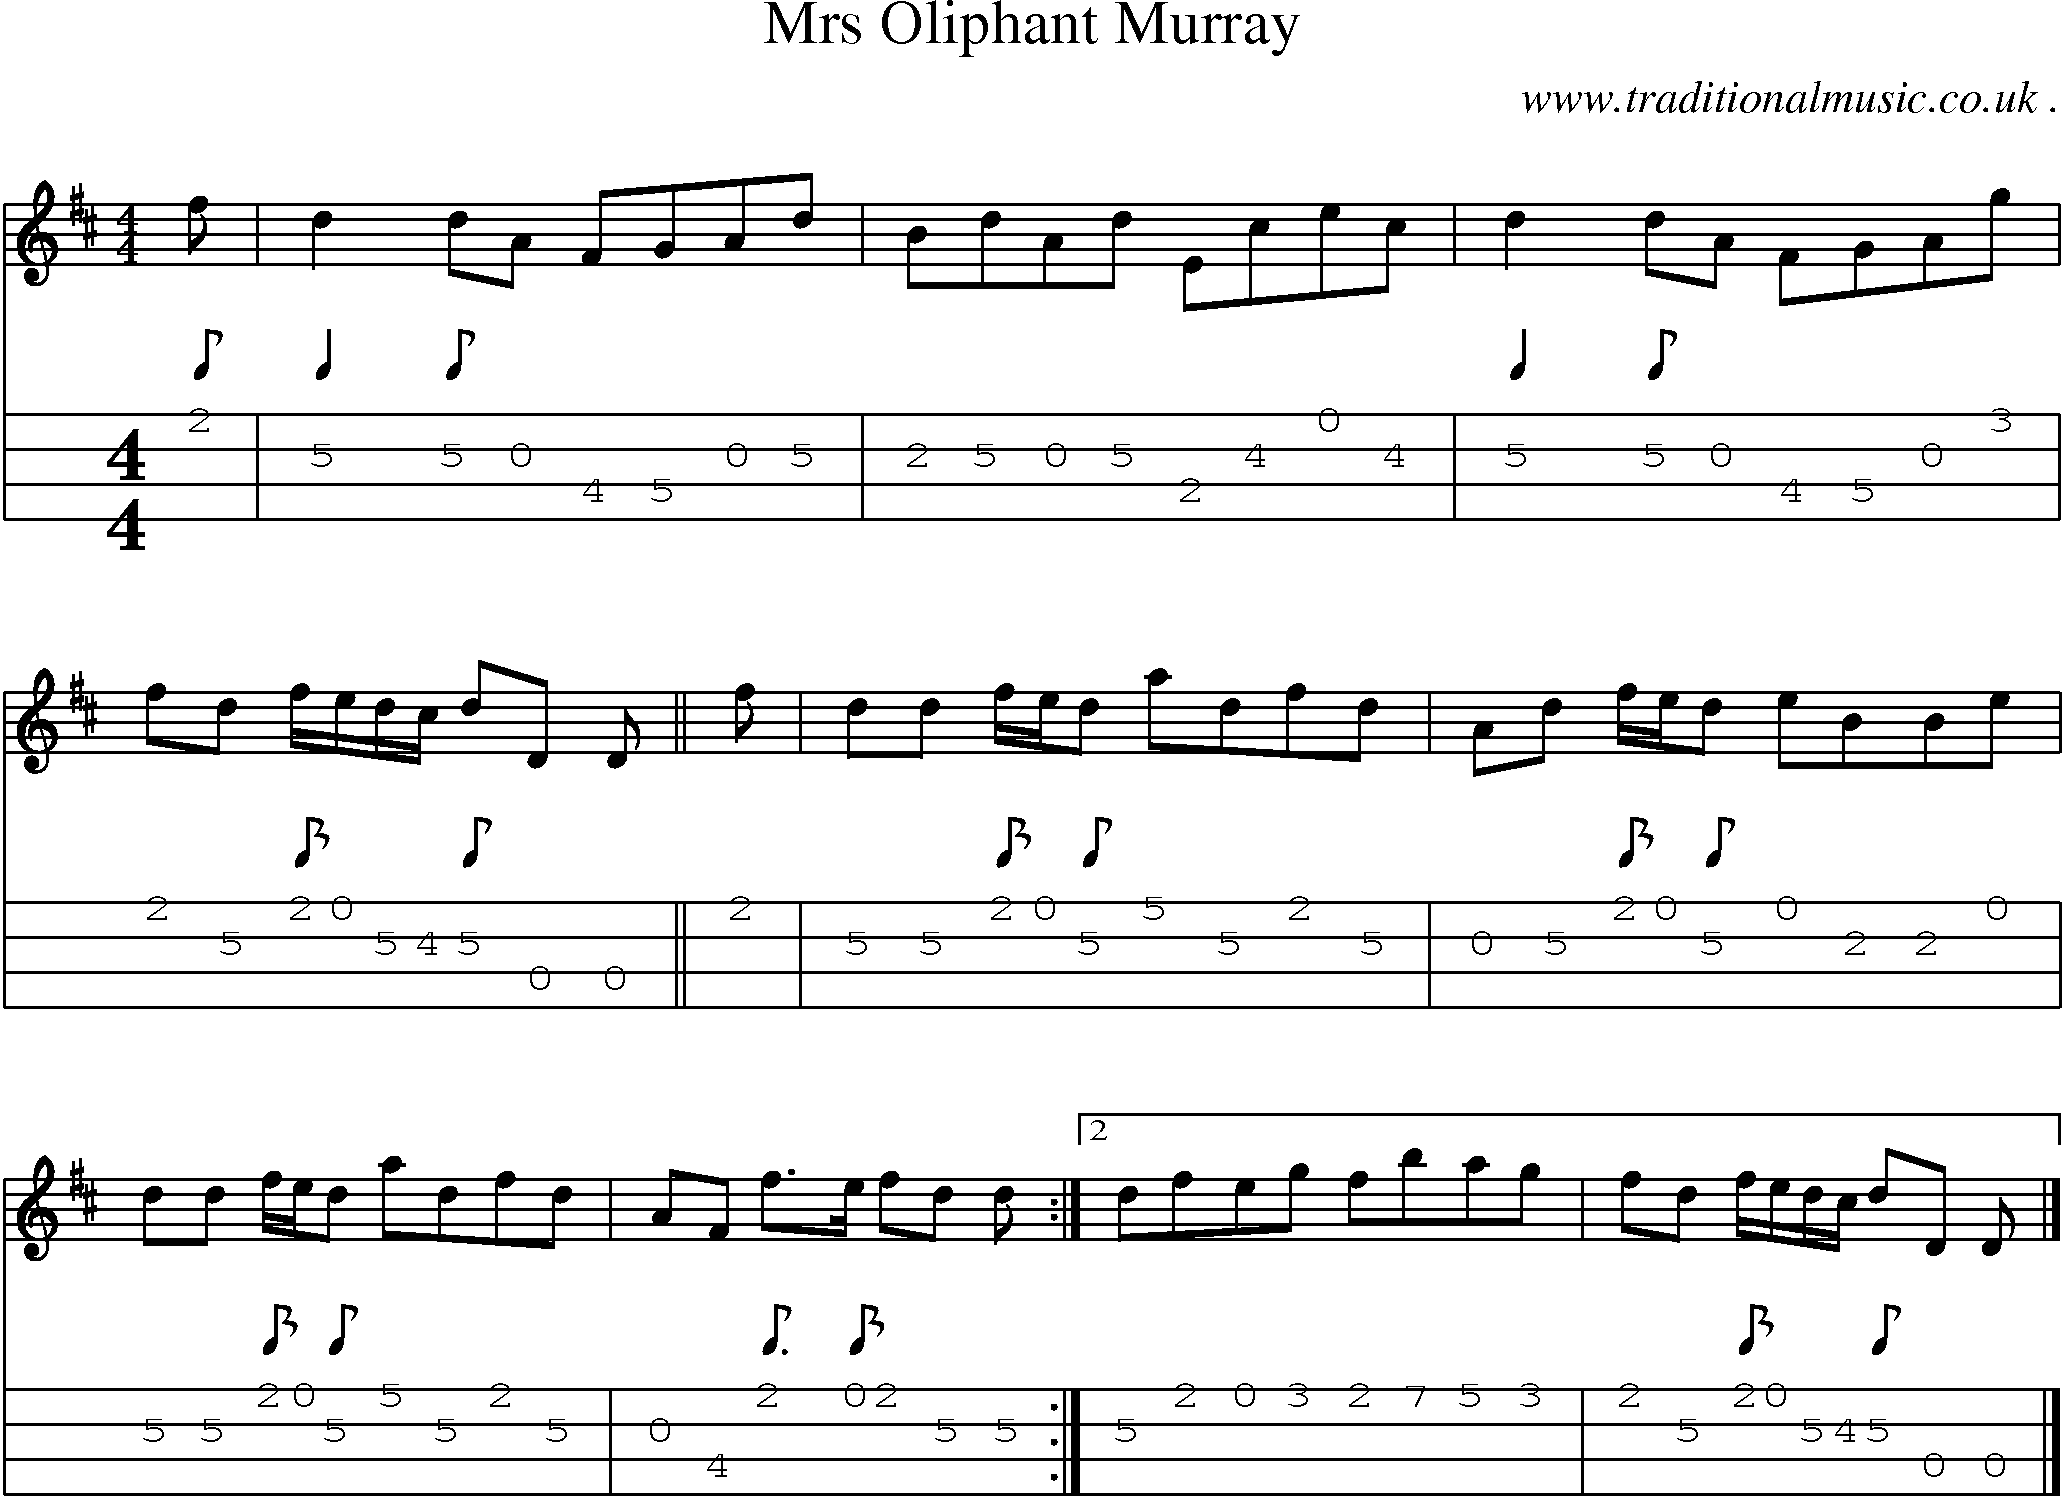 Sheet-music  score, Chords and Mandolin Tabs for Mrs Oliphant Murray